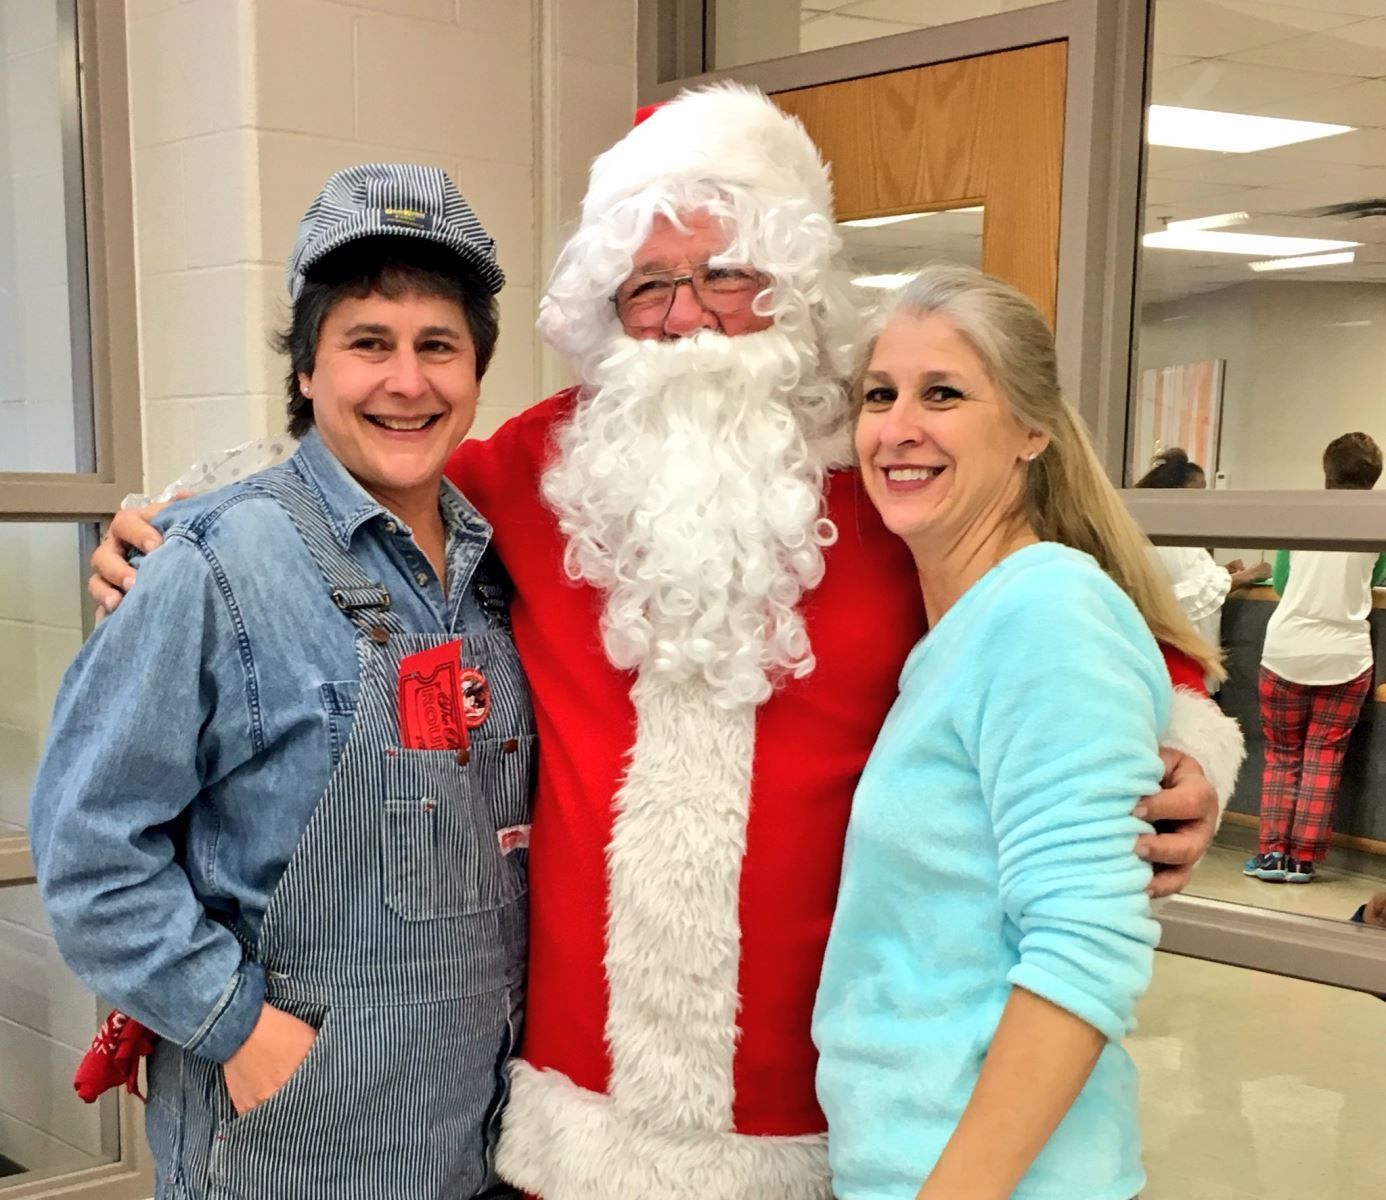 a man dressed as santa claus is posing for a picture with two women .